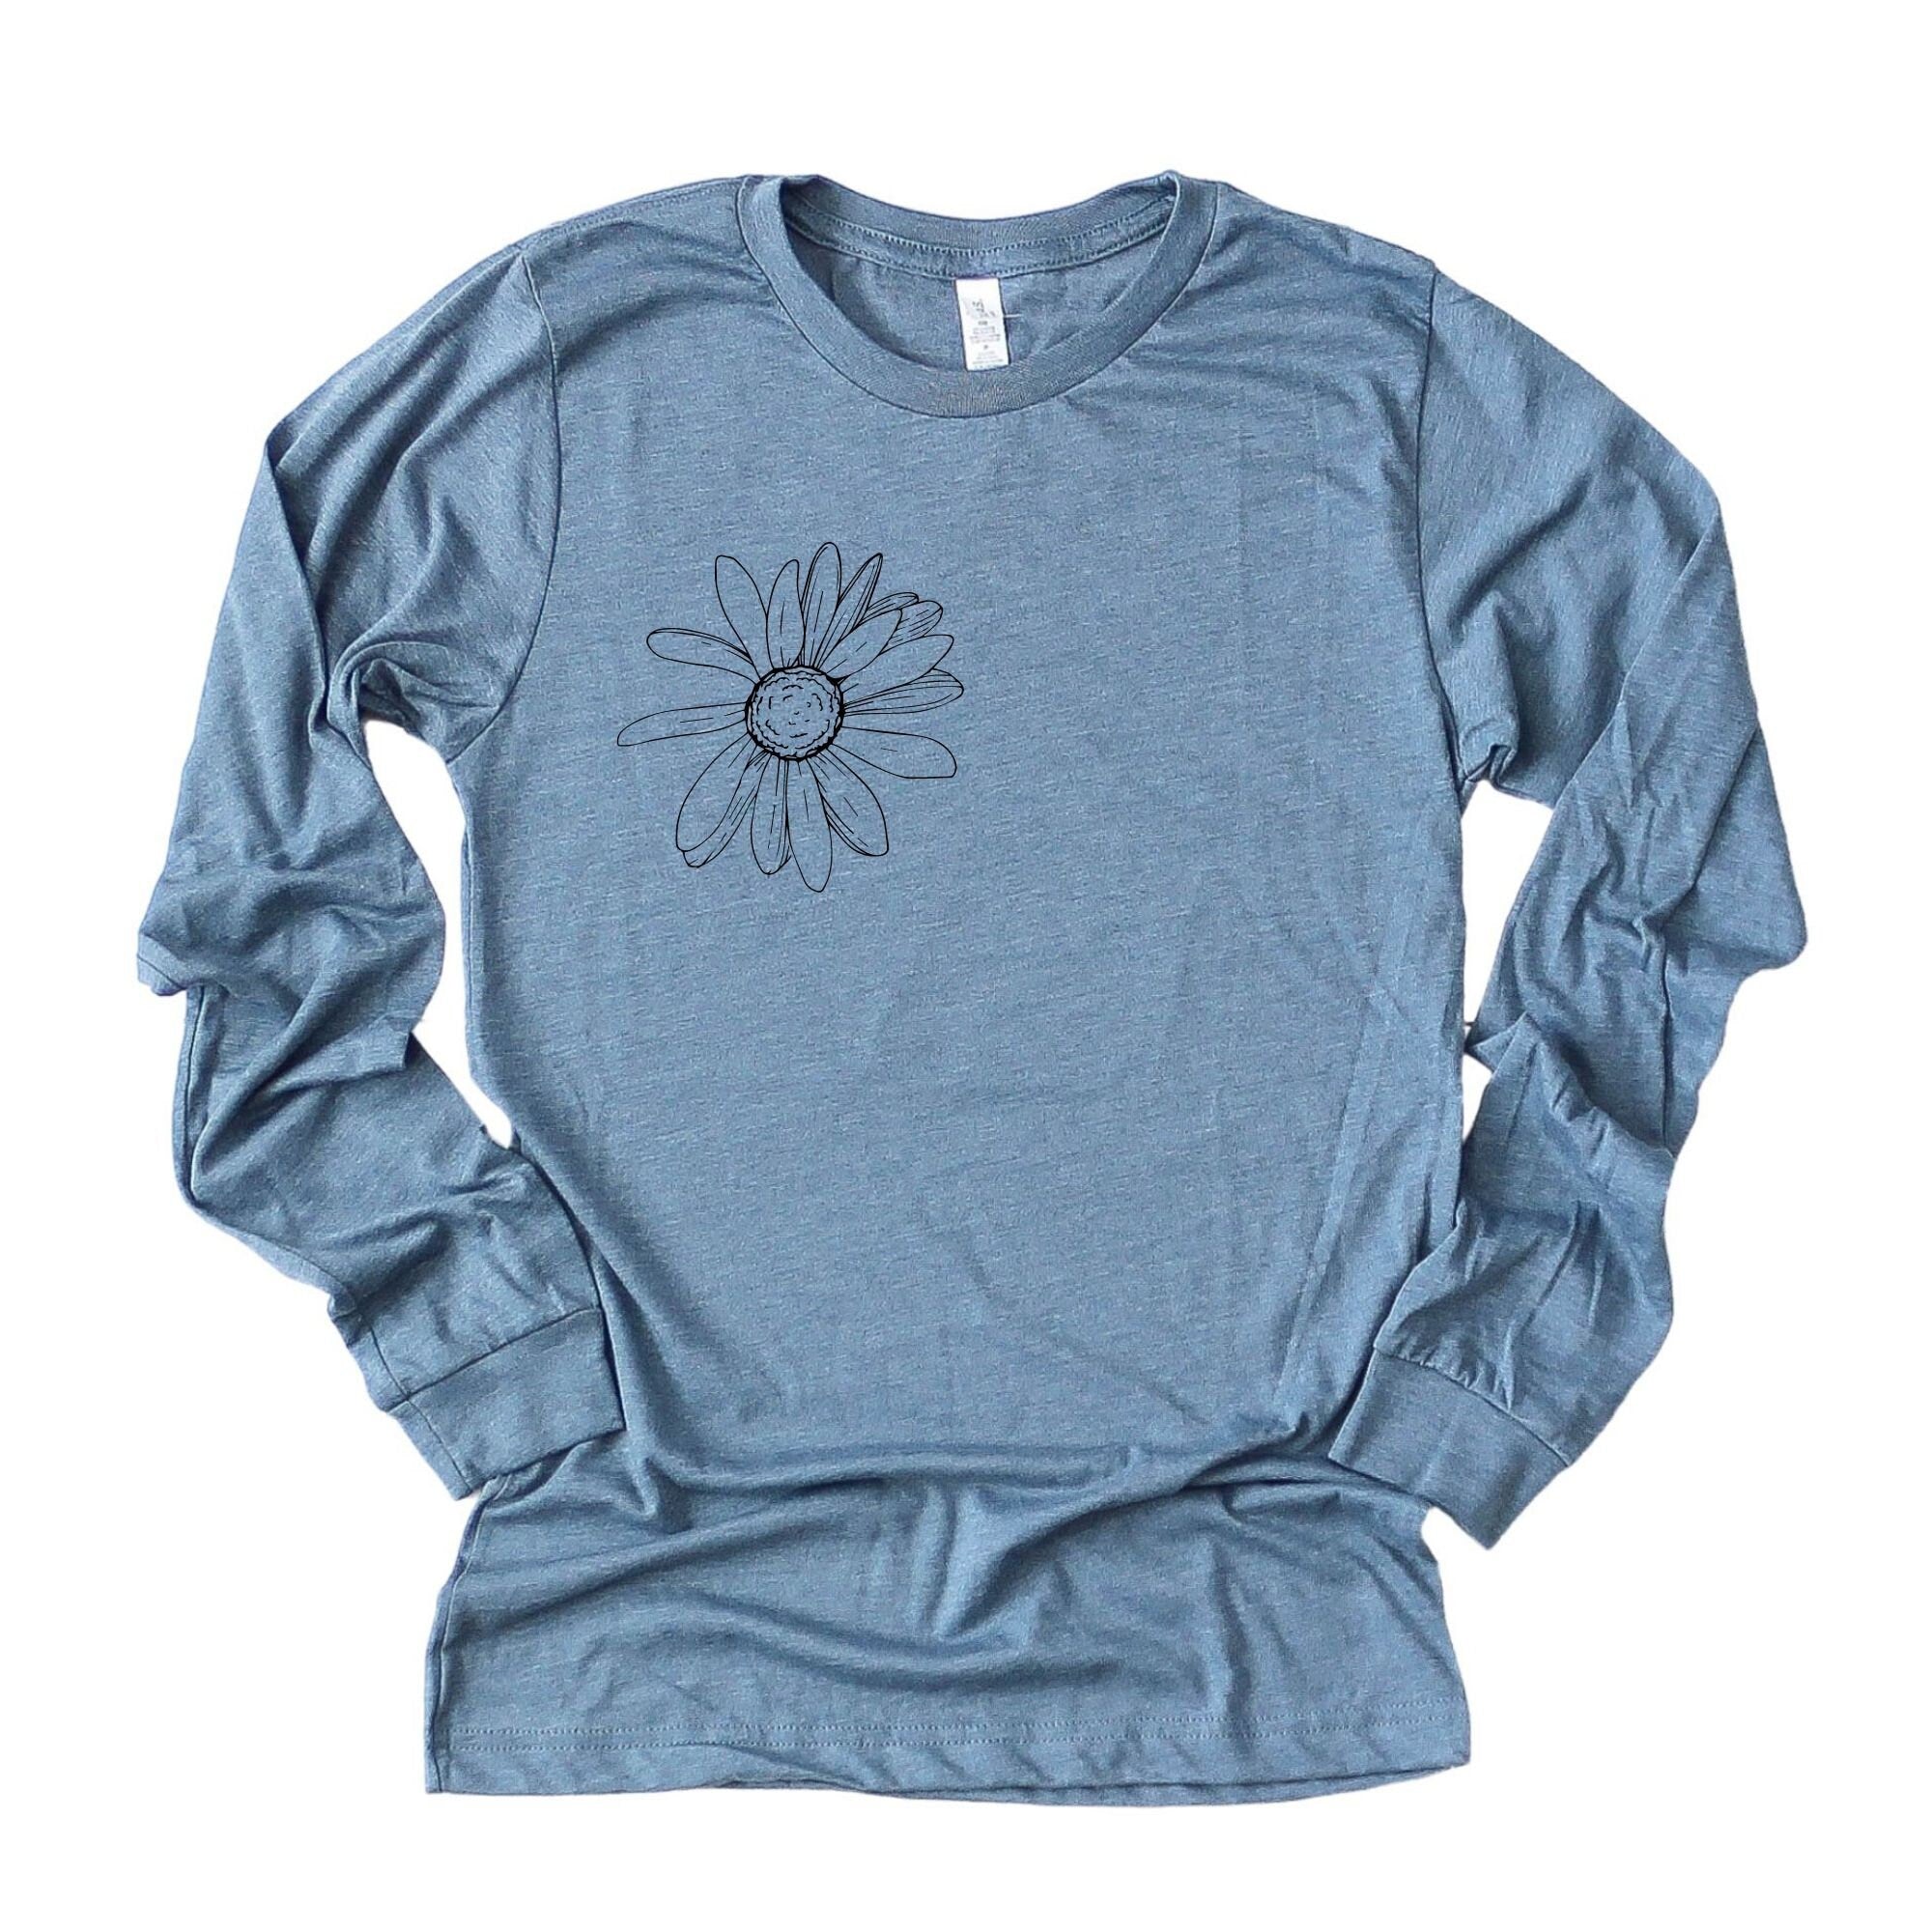 Daisy Flower Shirt, Shirts for Women, Womens Shirts, Graphic Tee, Plant T Shirt, Travel Shirt, Nature TShirt, Wildflower , Gift for Her *UNISEX FIT*-Long Sleeves-208 Tees Wholesale, Idaho